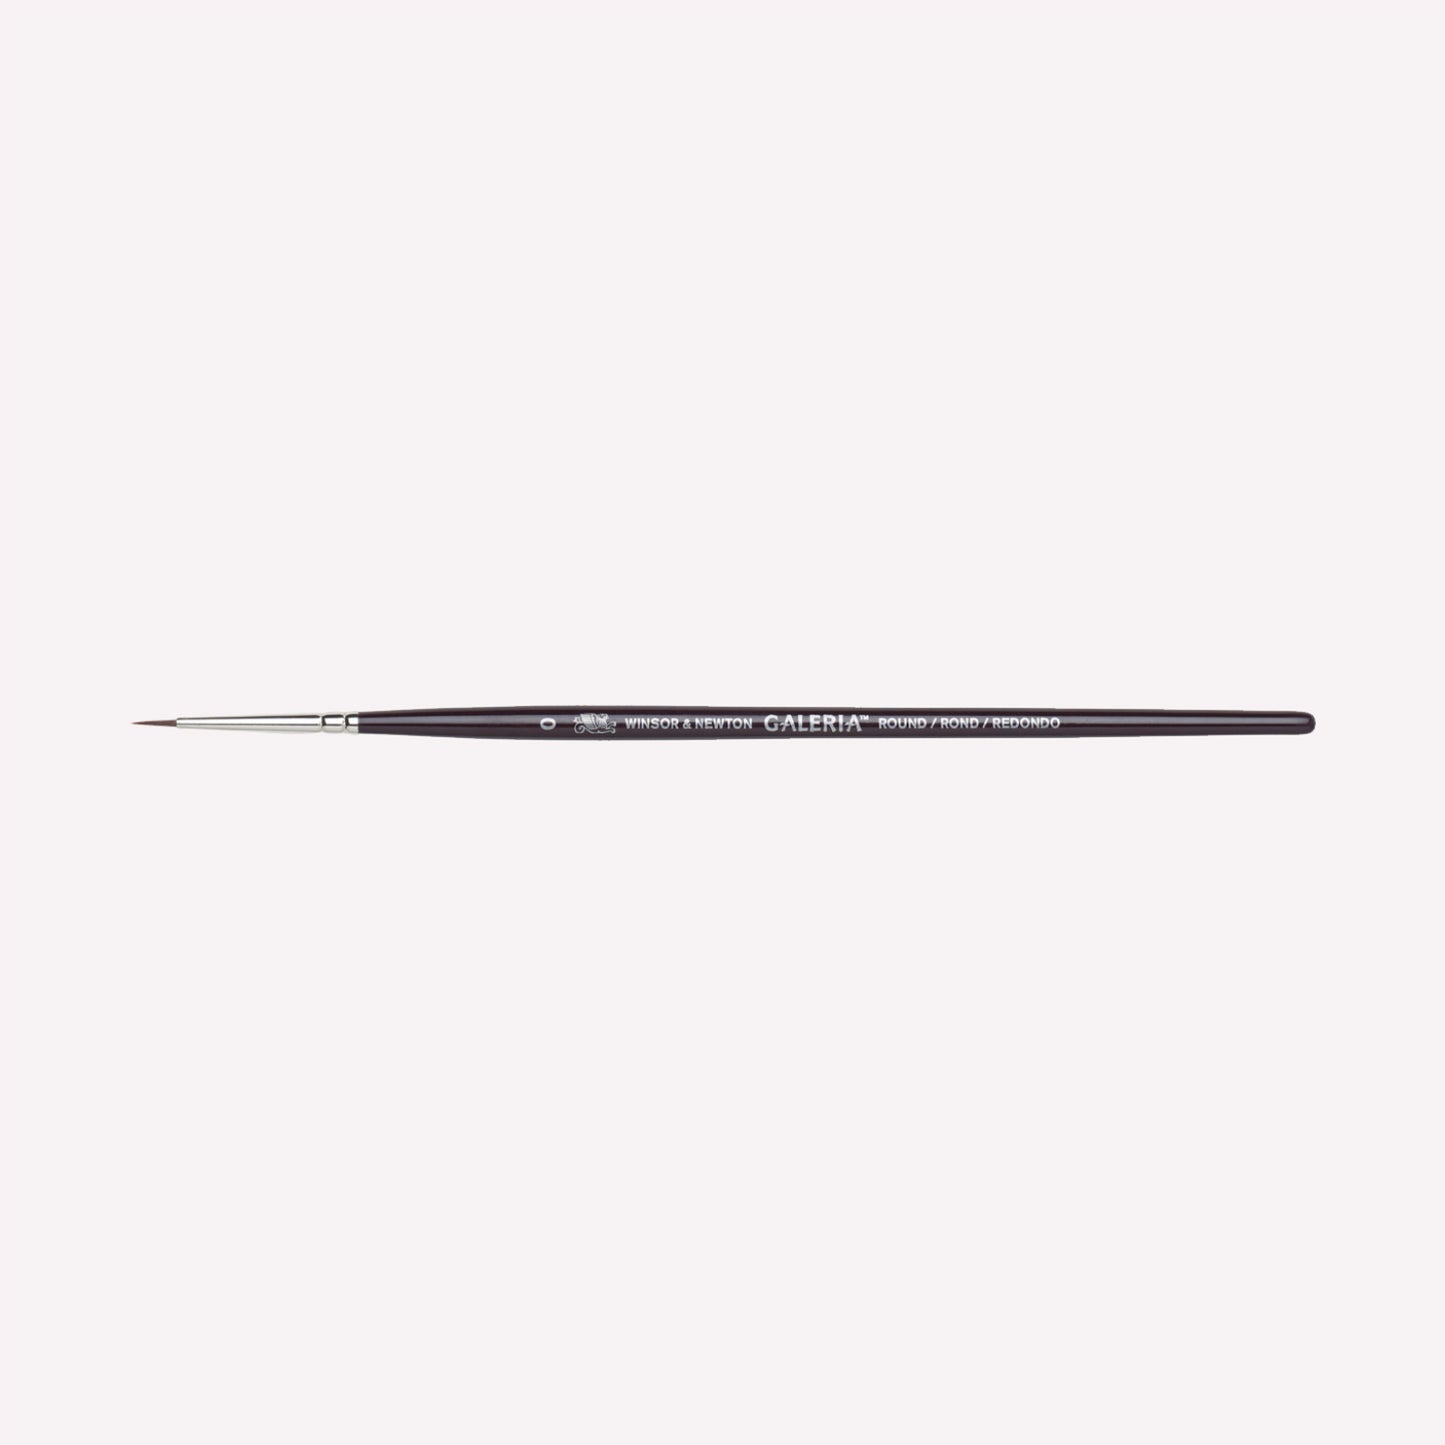 Winsor & Newton Galeria Round paintbrush in size 0. Brushes have synthetic filaments, and short wooden handles. 